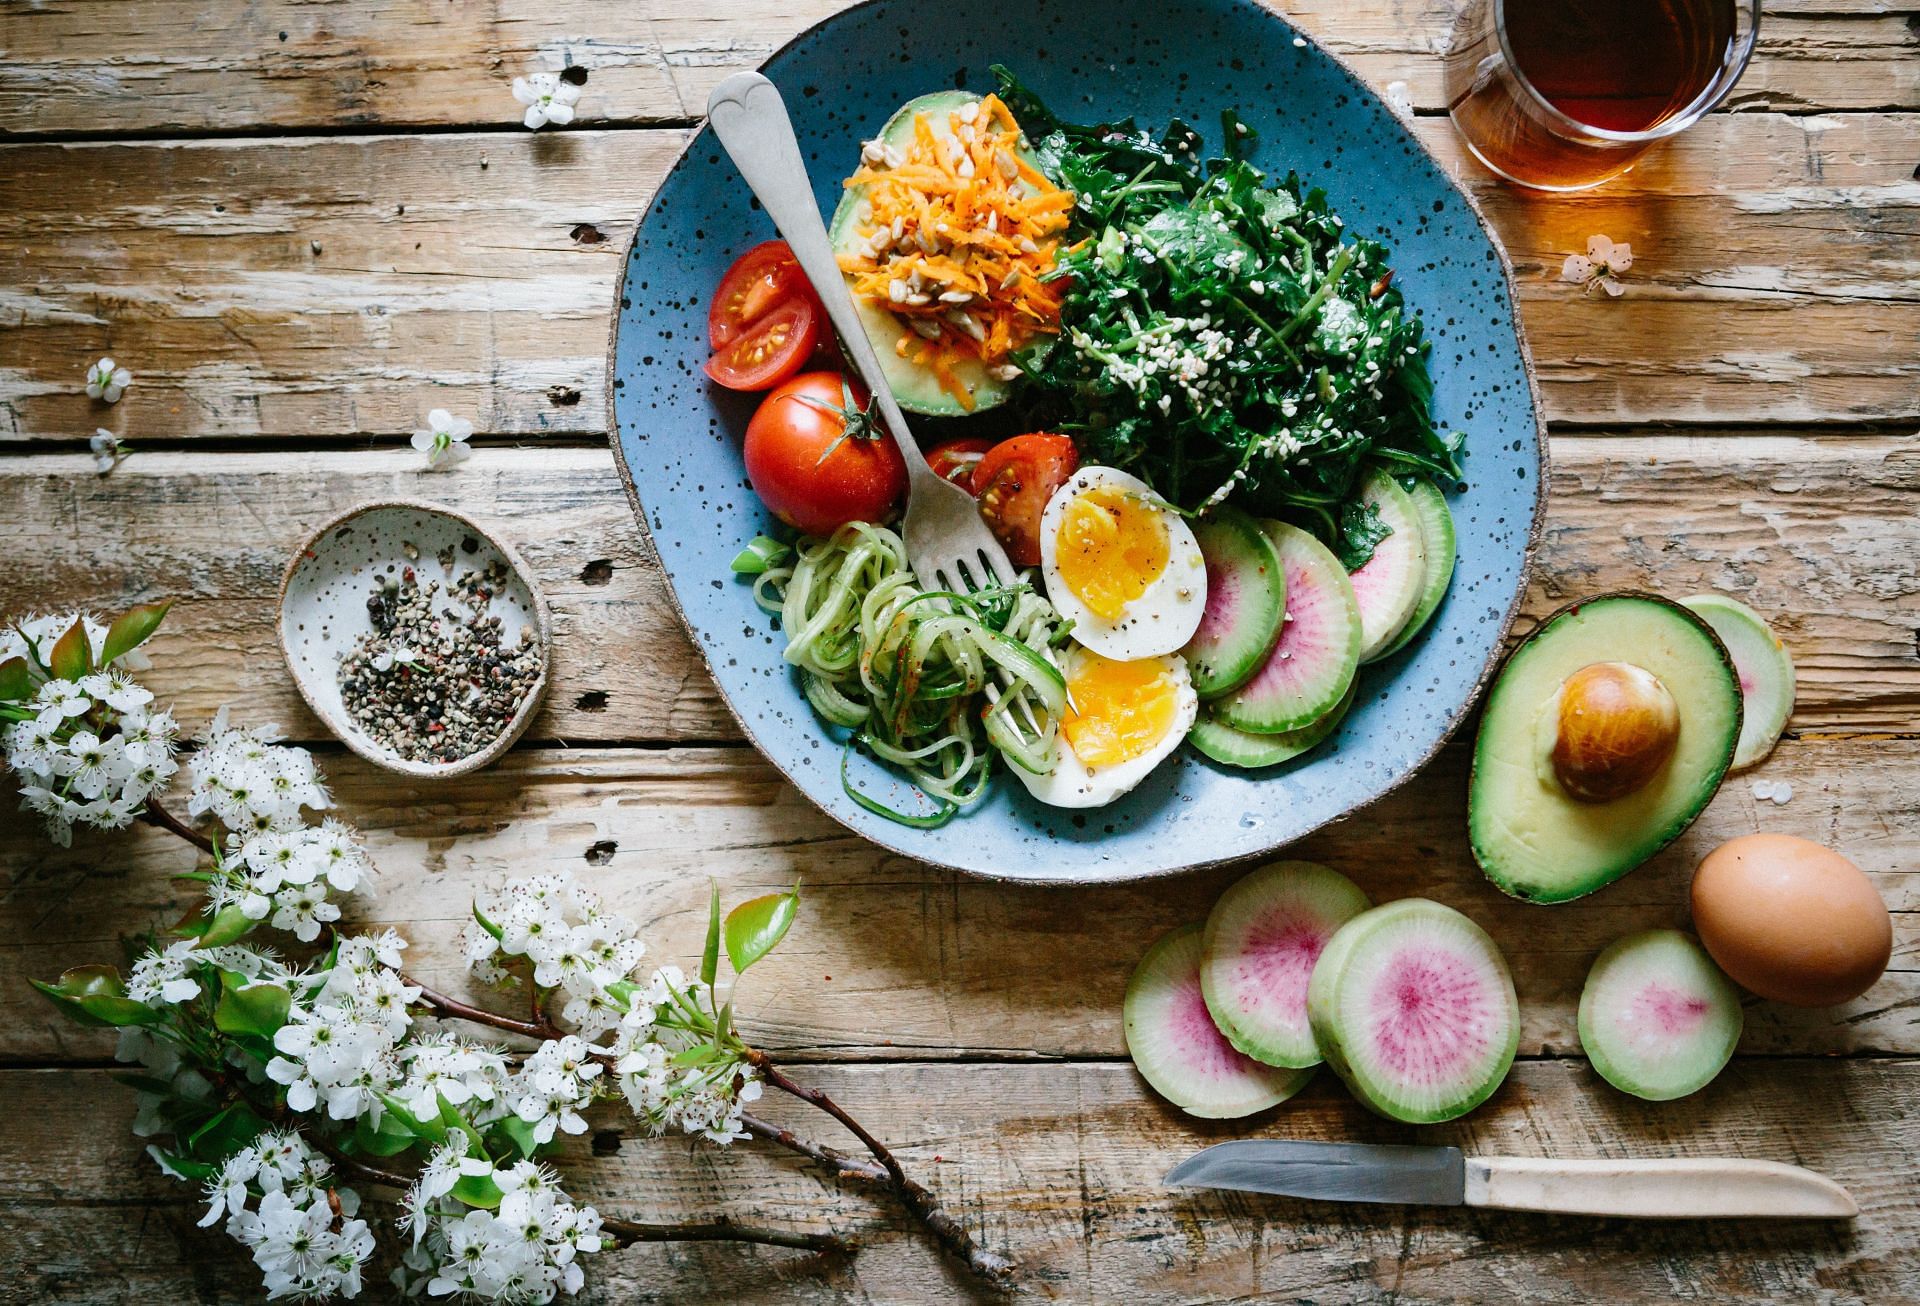 Healthy diet and good lifestyle choices are key to maintain heart health. (Image via Unsplash/Brooke Lark)